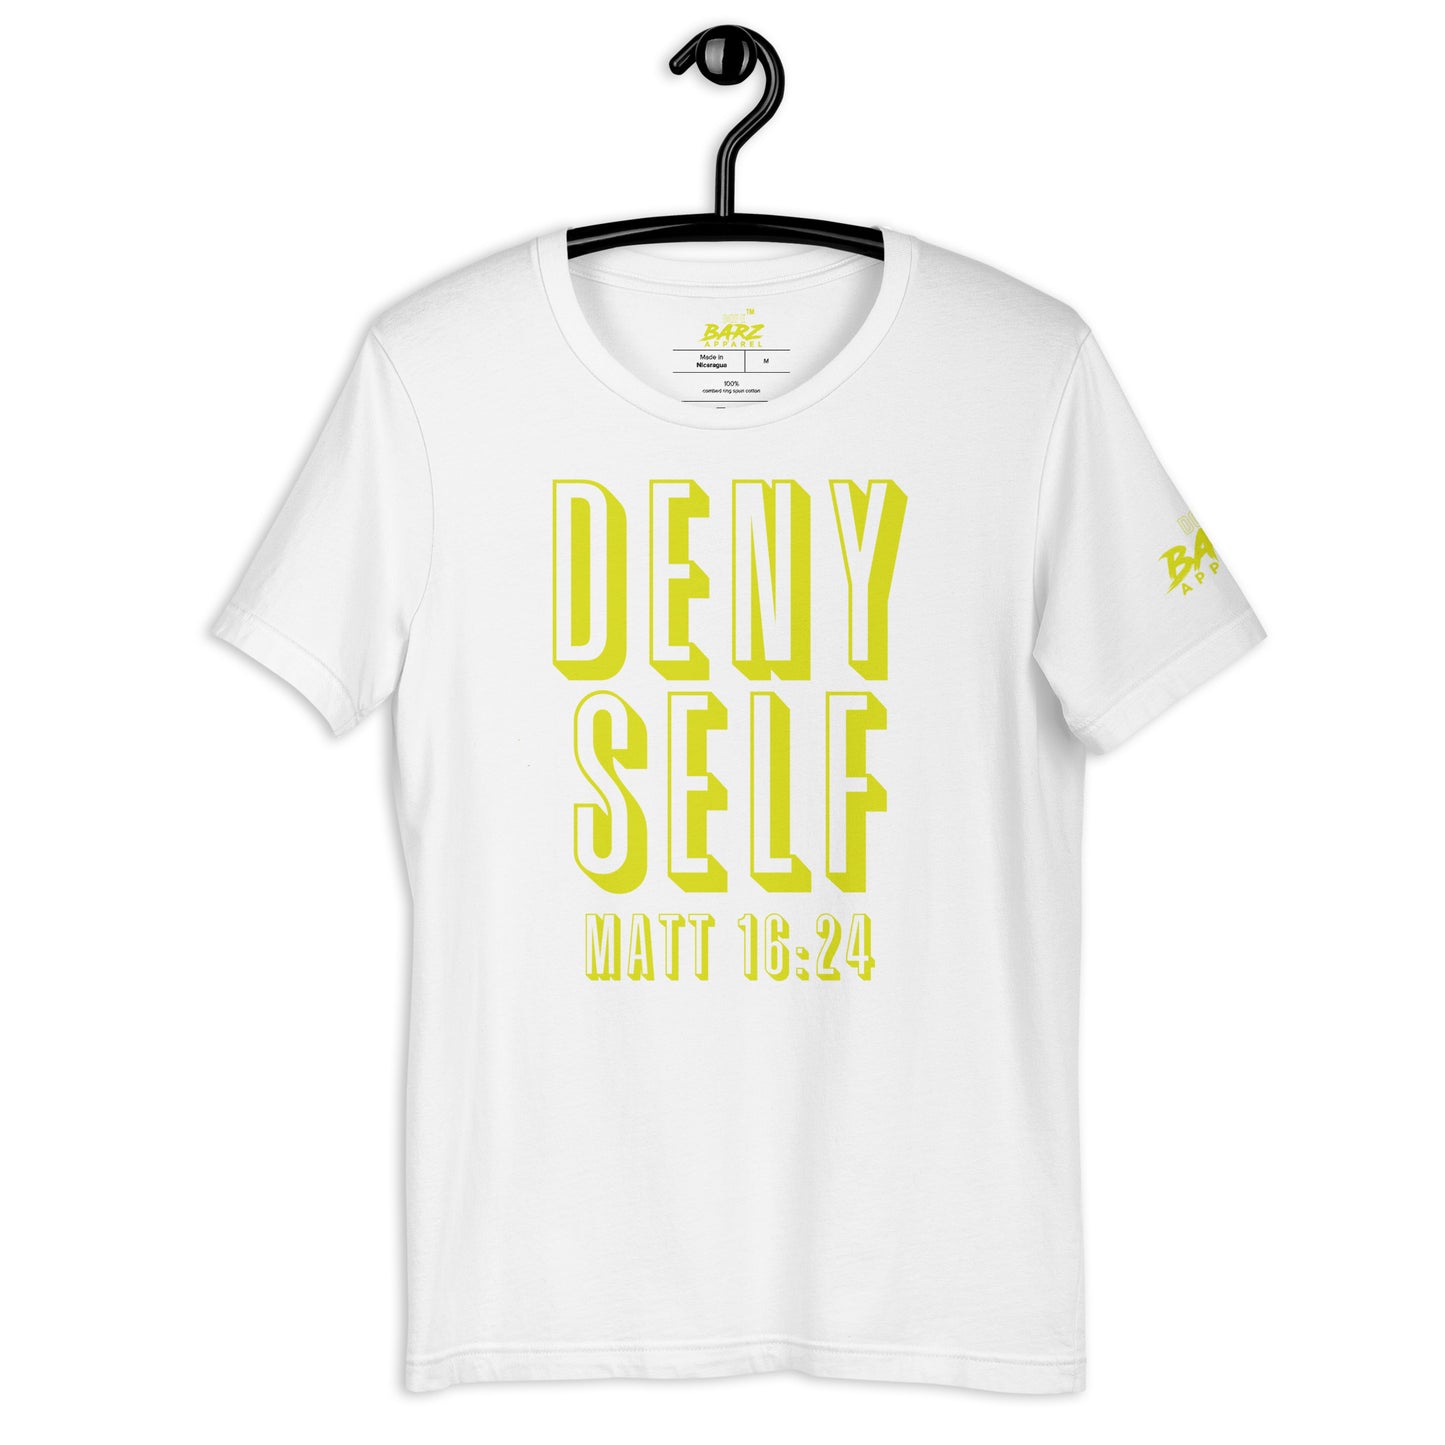 Deny Self (white with neon letters) - Dope Barz Apparel